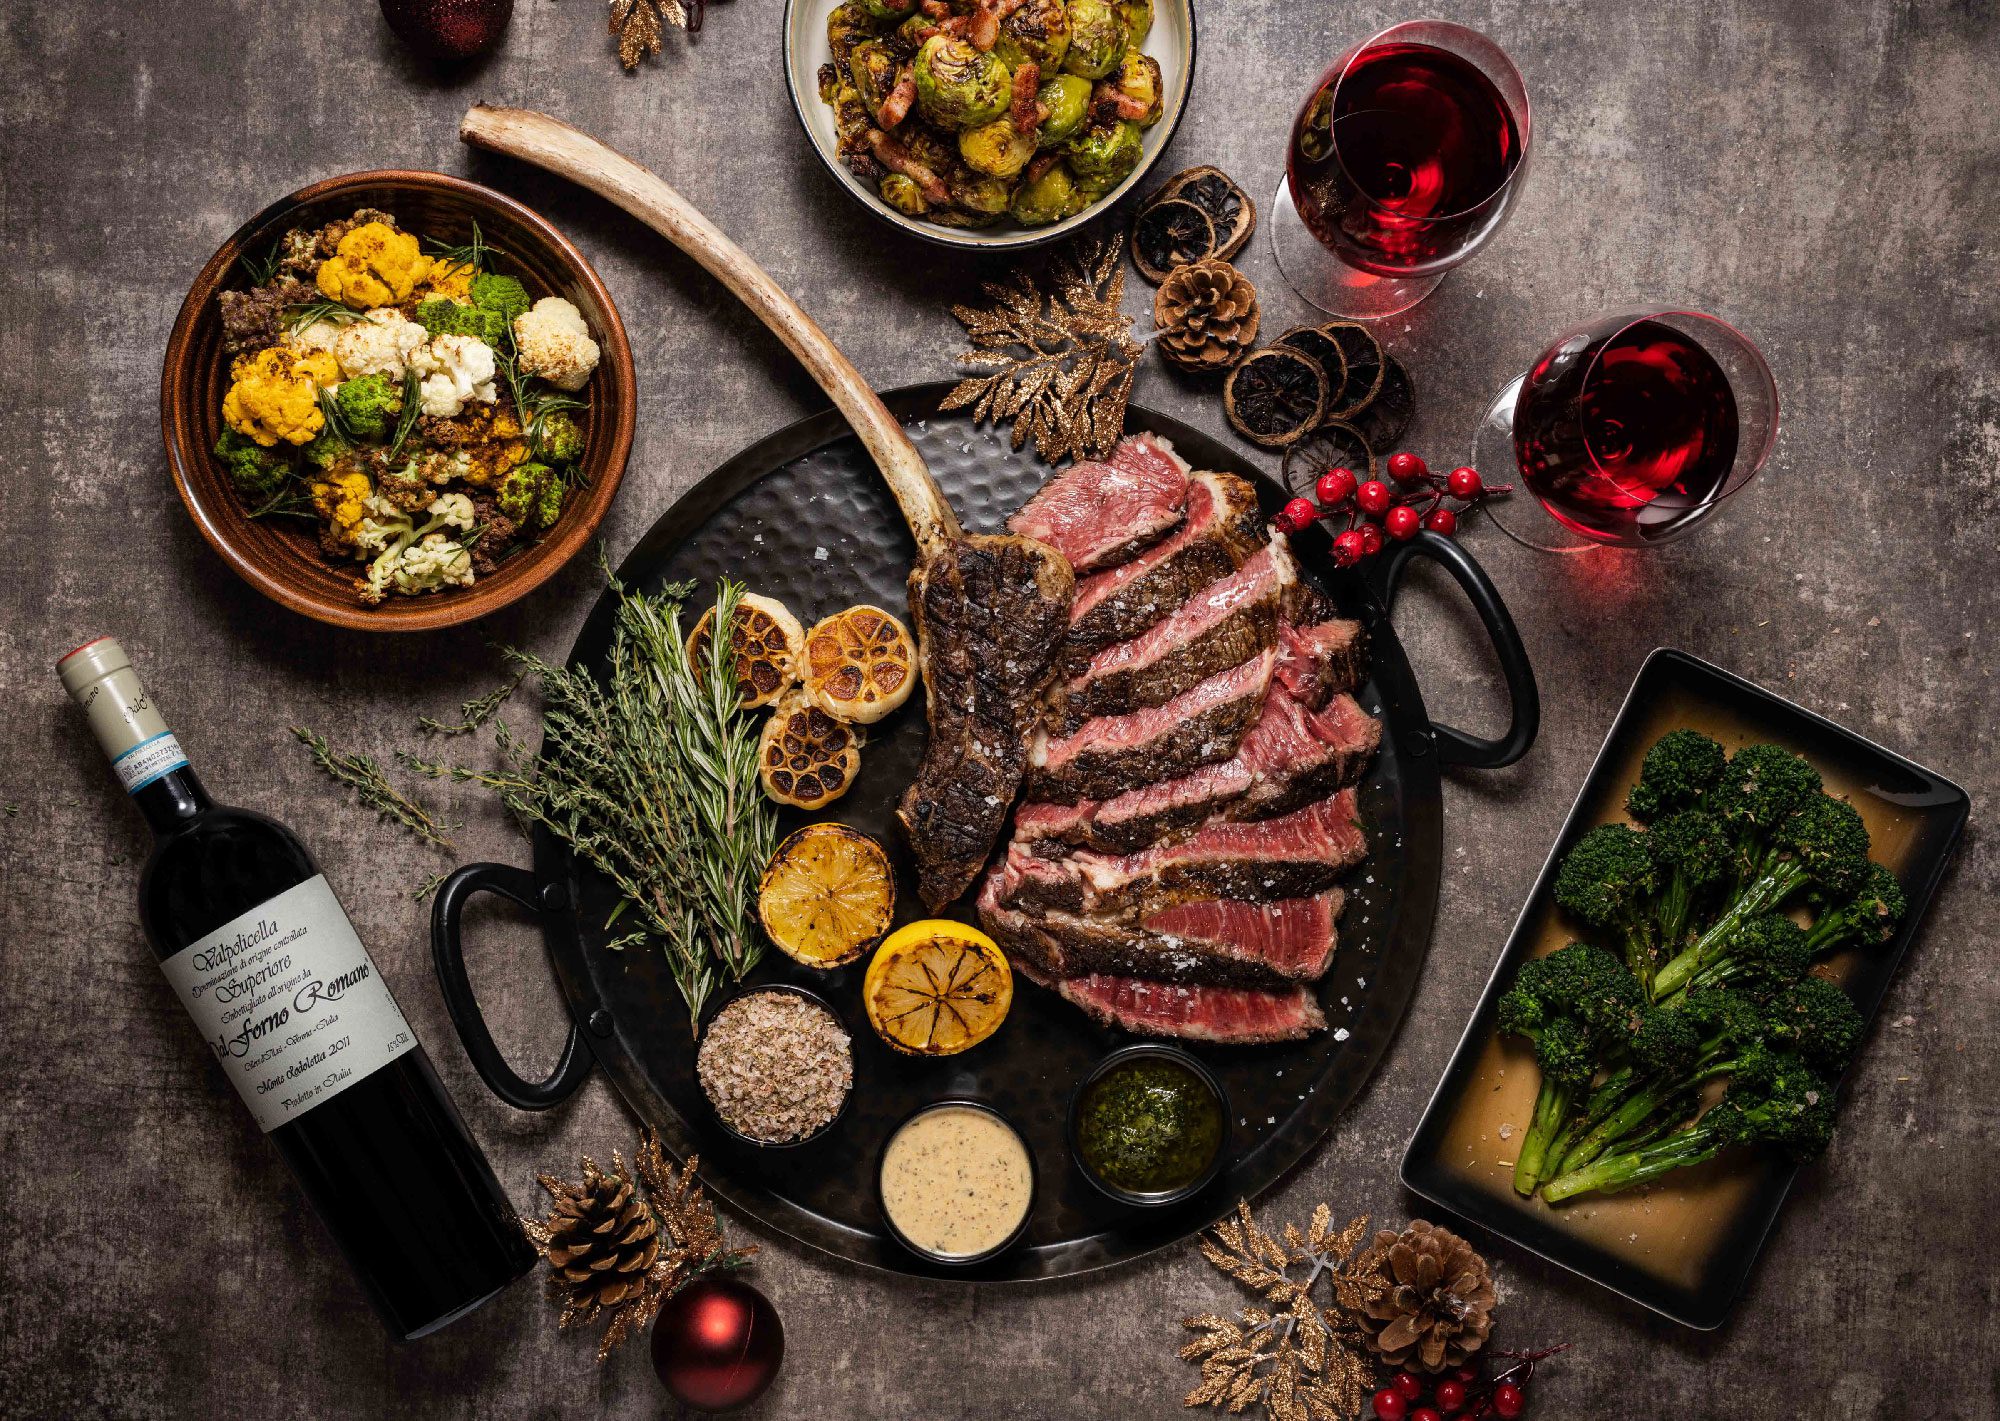 Christmas Dishes & Festive Season at Bistecca Tuscan Steakhouse featured image